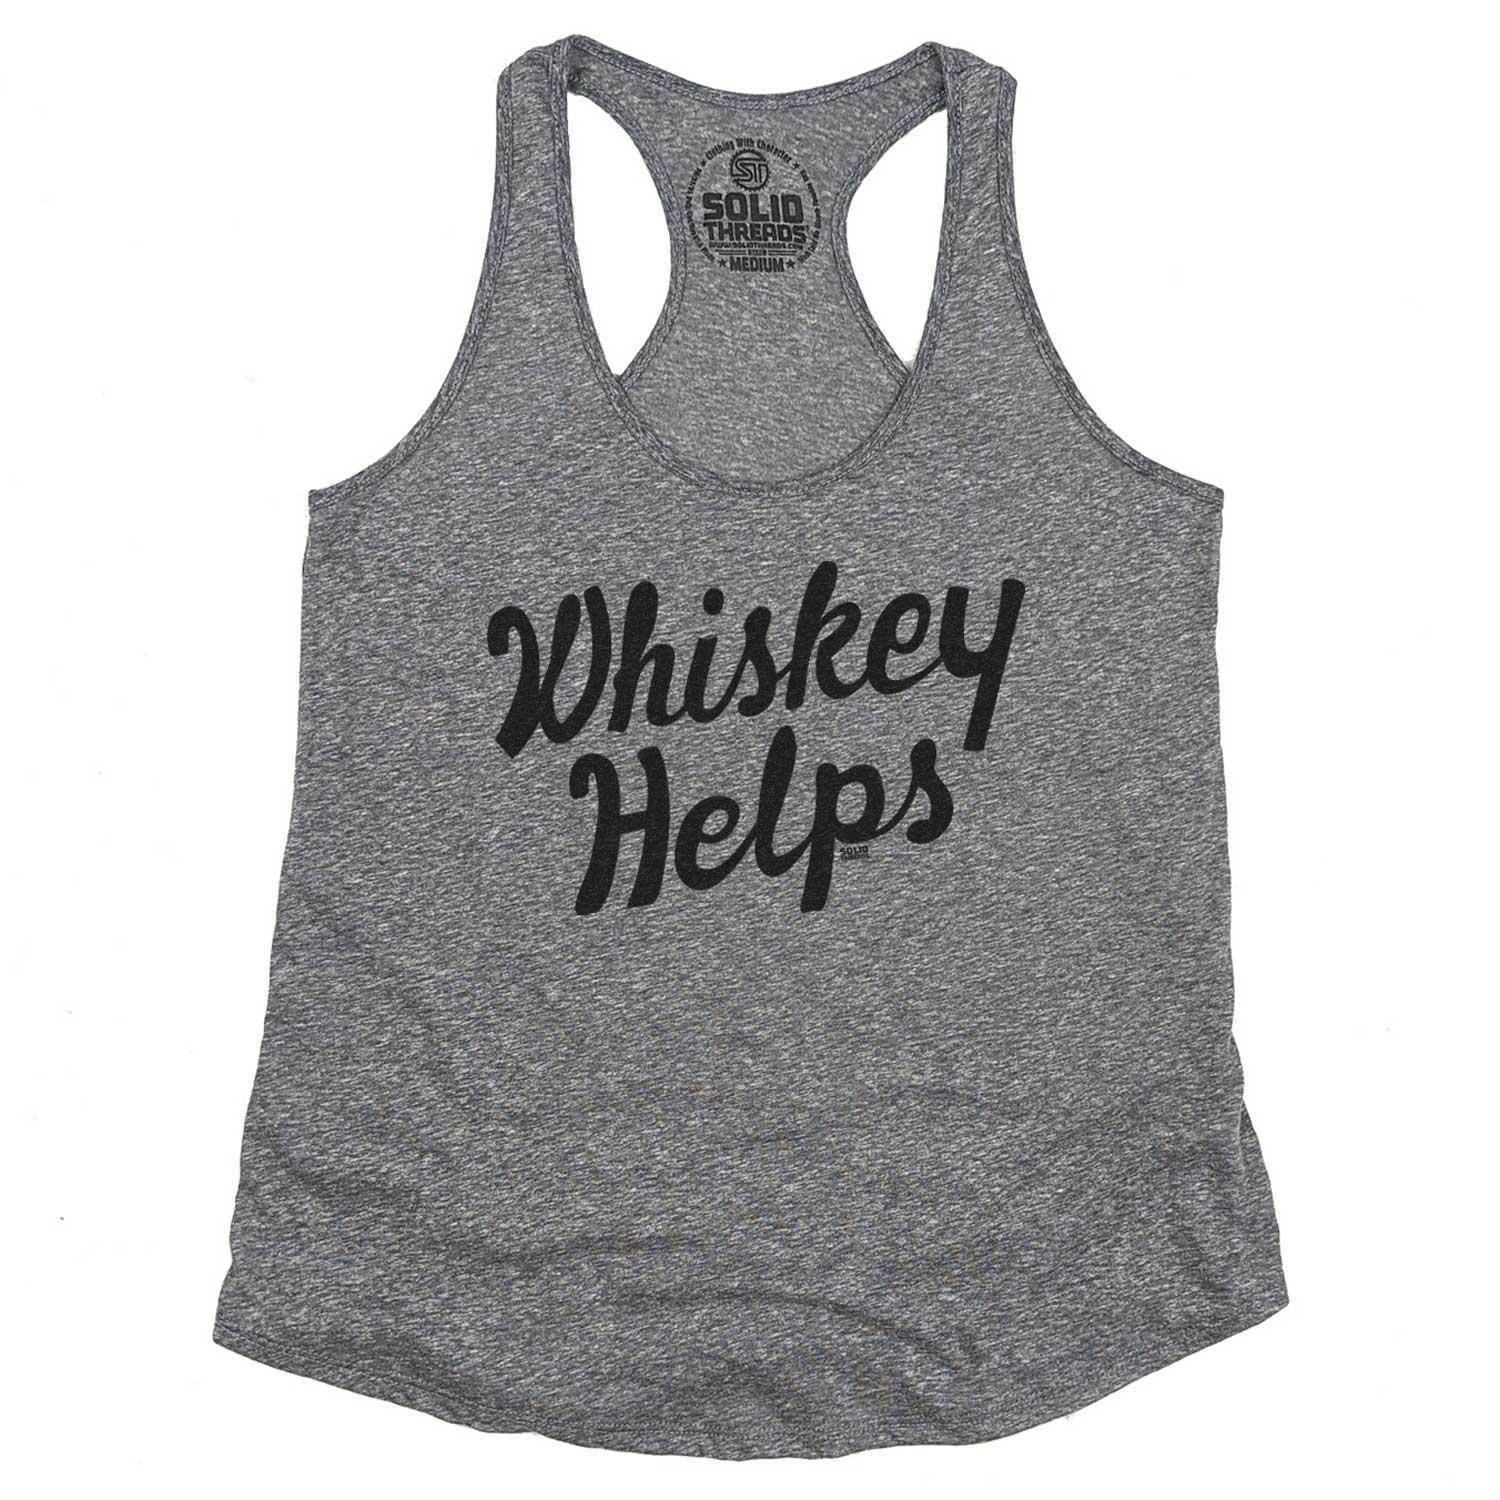 Women's Whiskey Helps Vintage Graphic Tank Top | Funny Drinking T-Shirt | Sold Threads